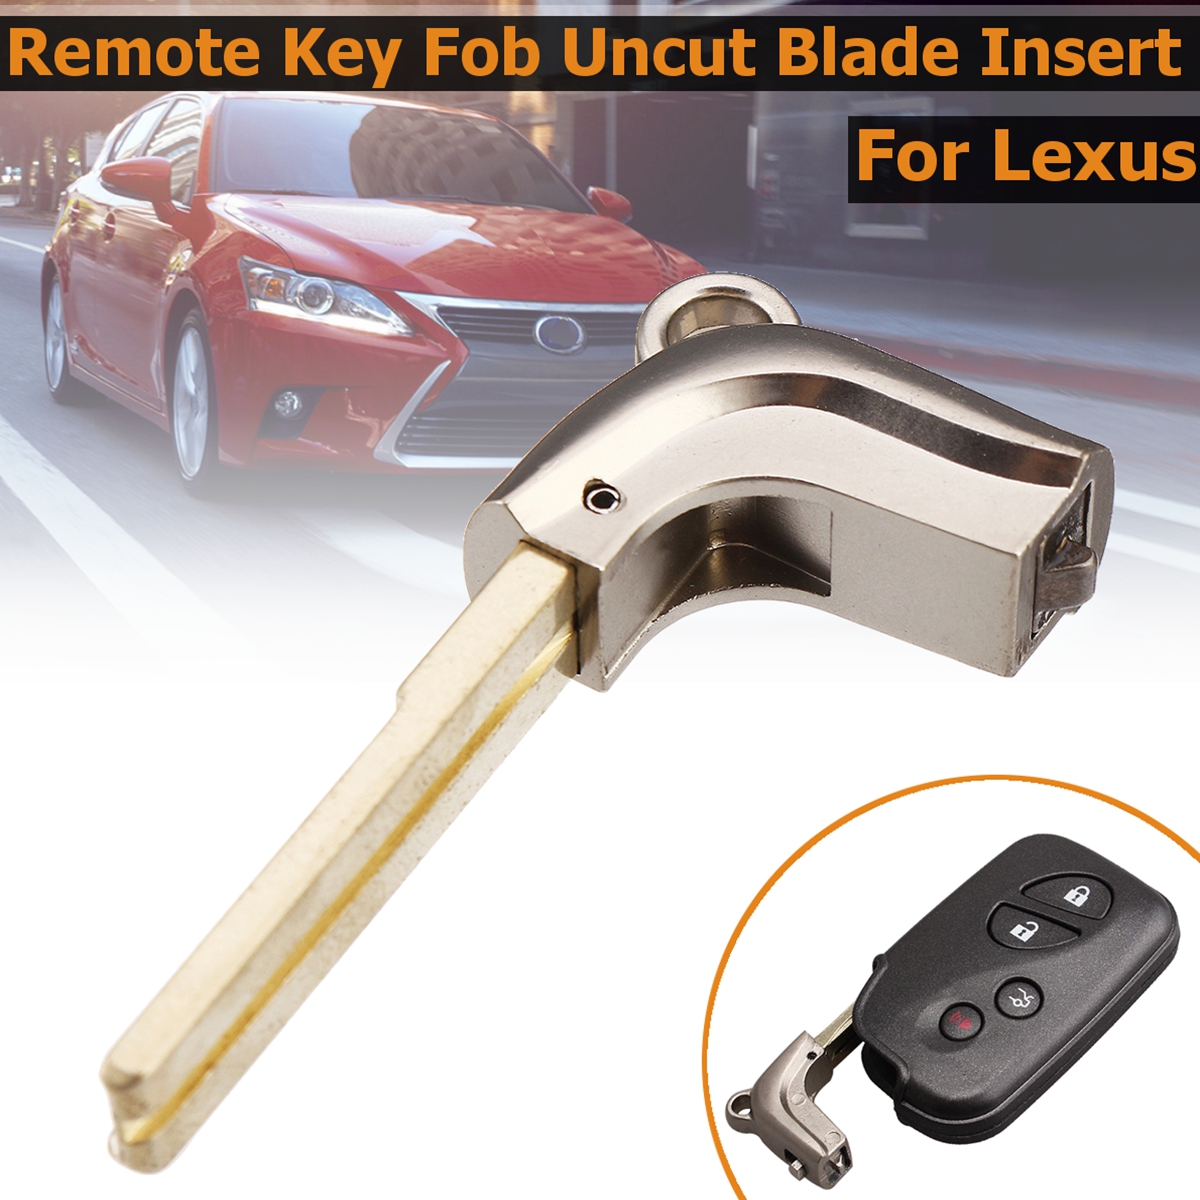 Uncut Key Fob Blade Insert For Lexus GS350 GS460 CT200h IS250 IS350 LS460 